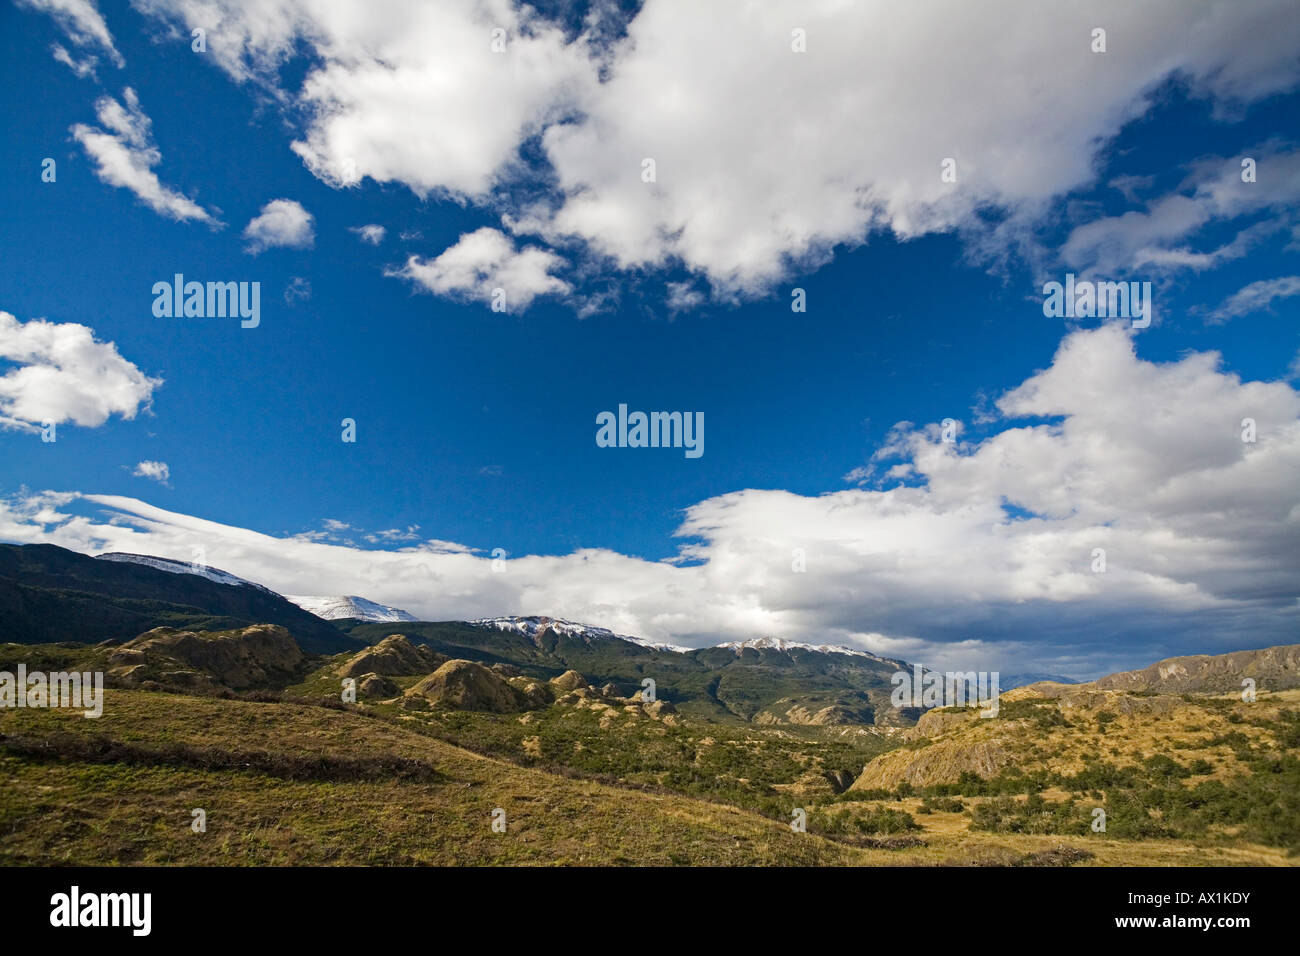 Landscape on the way to Cochrane, Patagonia, Chile, South America Stock Photo